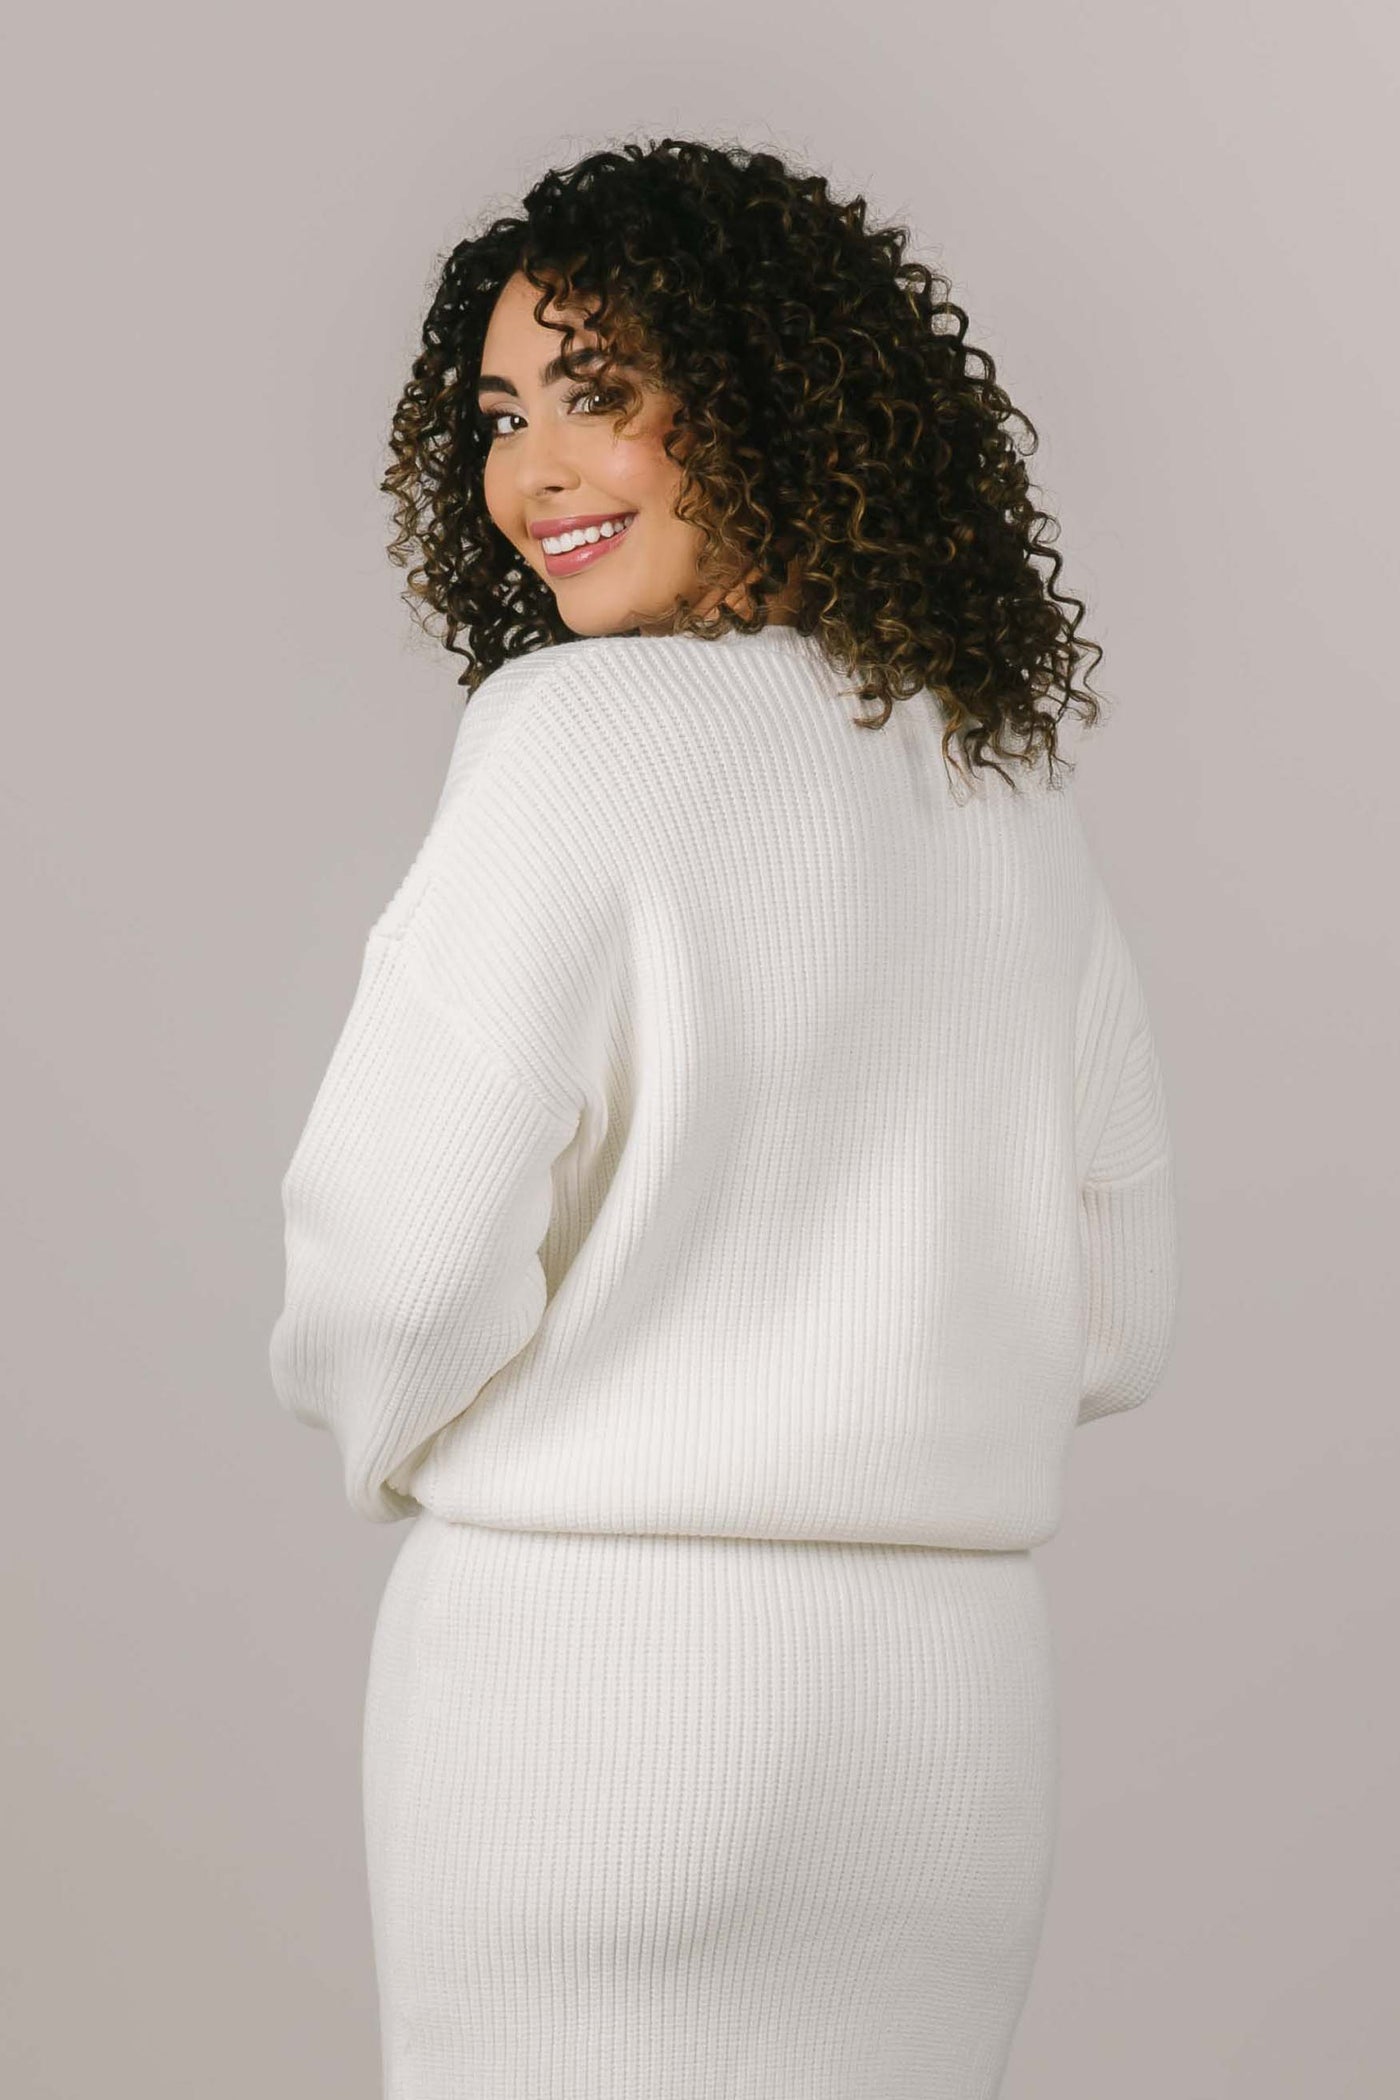 This is the back of a white sweater that is a part of a modest clothing set.